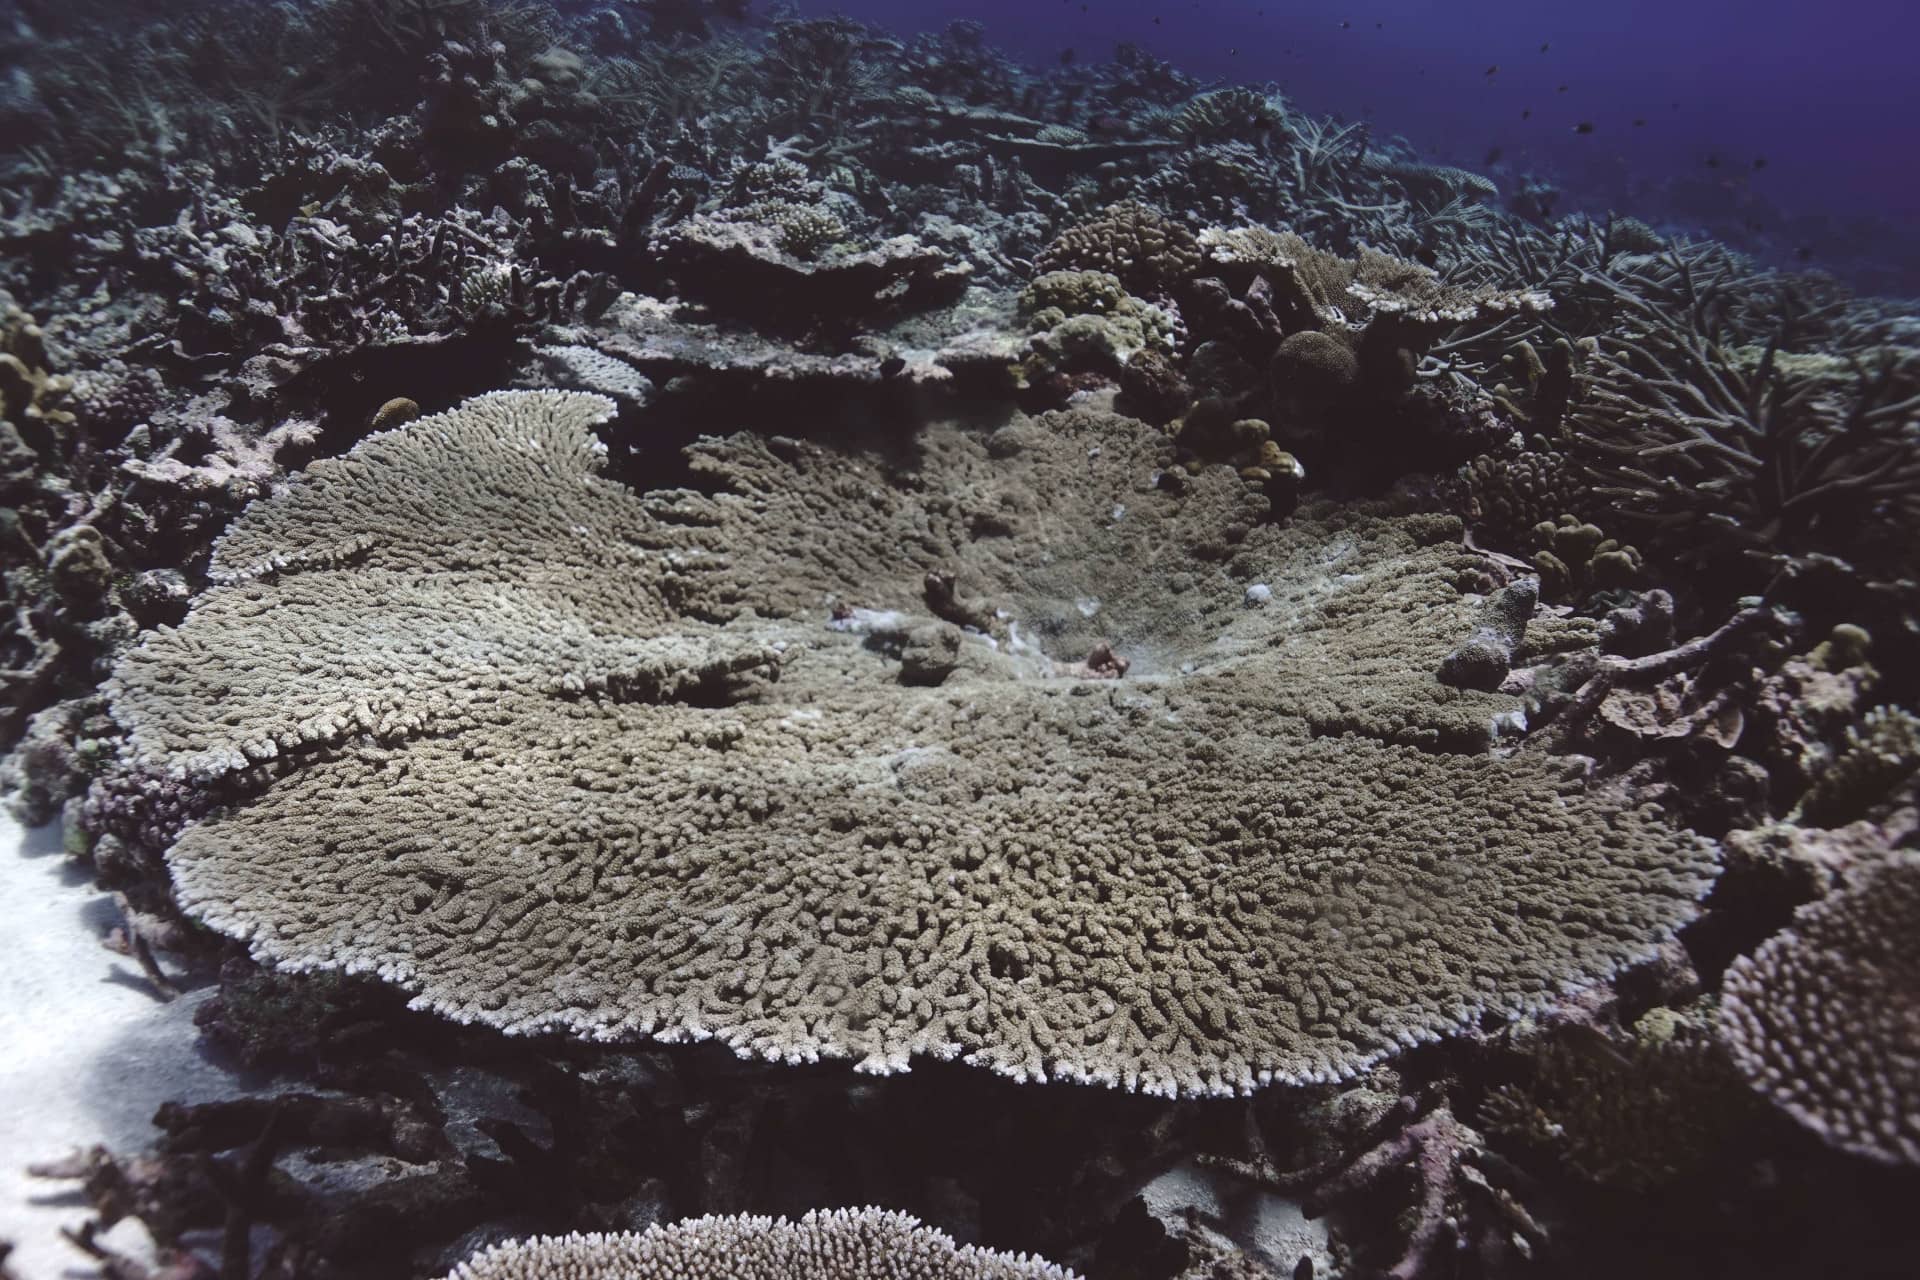 A living table coral in the Sapwuahfik Atoll area